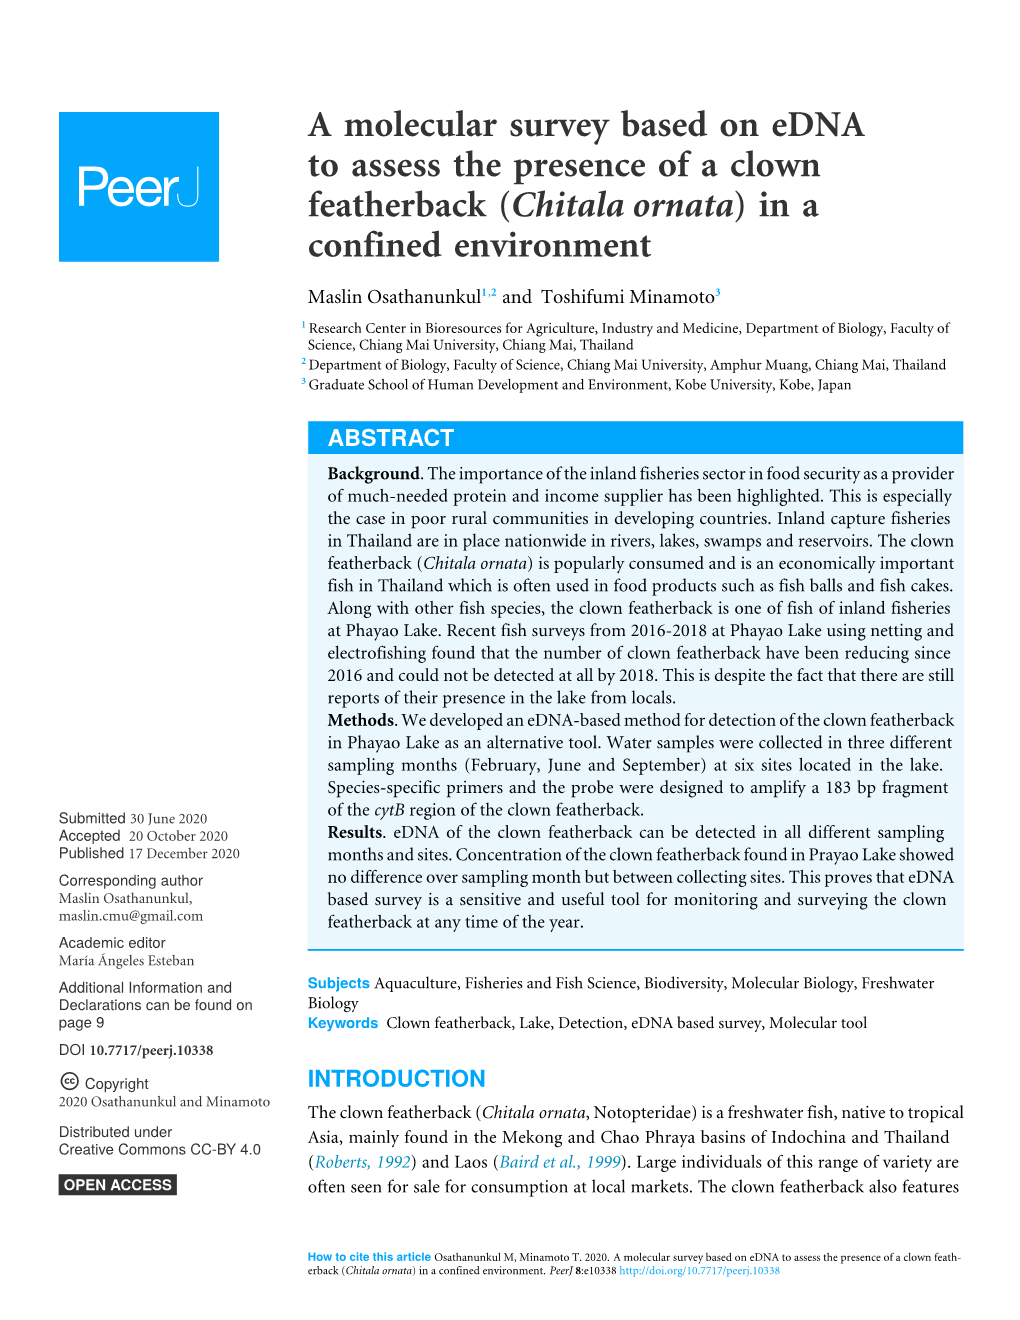 A Molecular Survey Based on Edna to Assess the Presence of a Clown Featherback (Chitala Ornata) in a Confined Environment